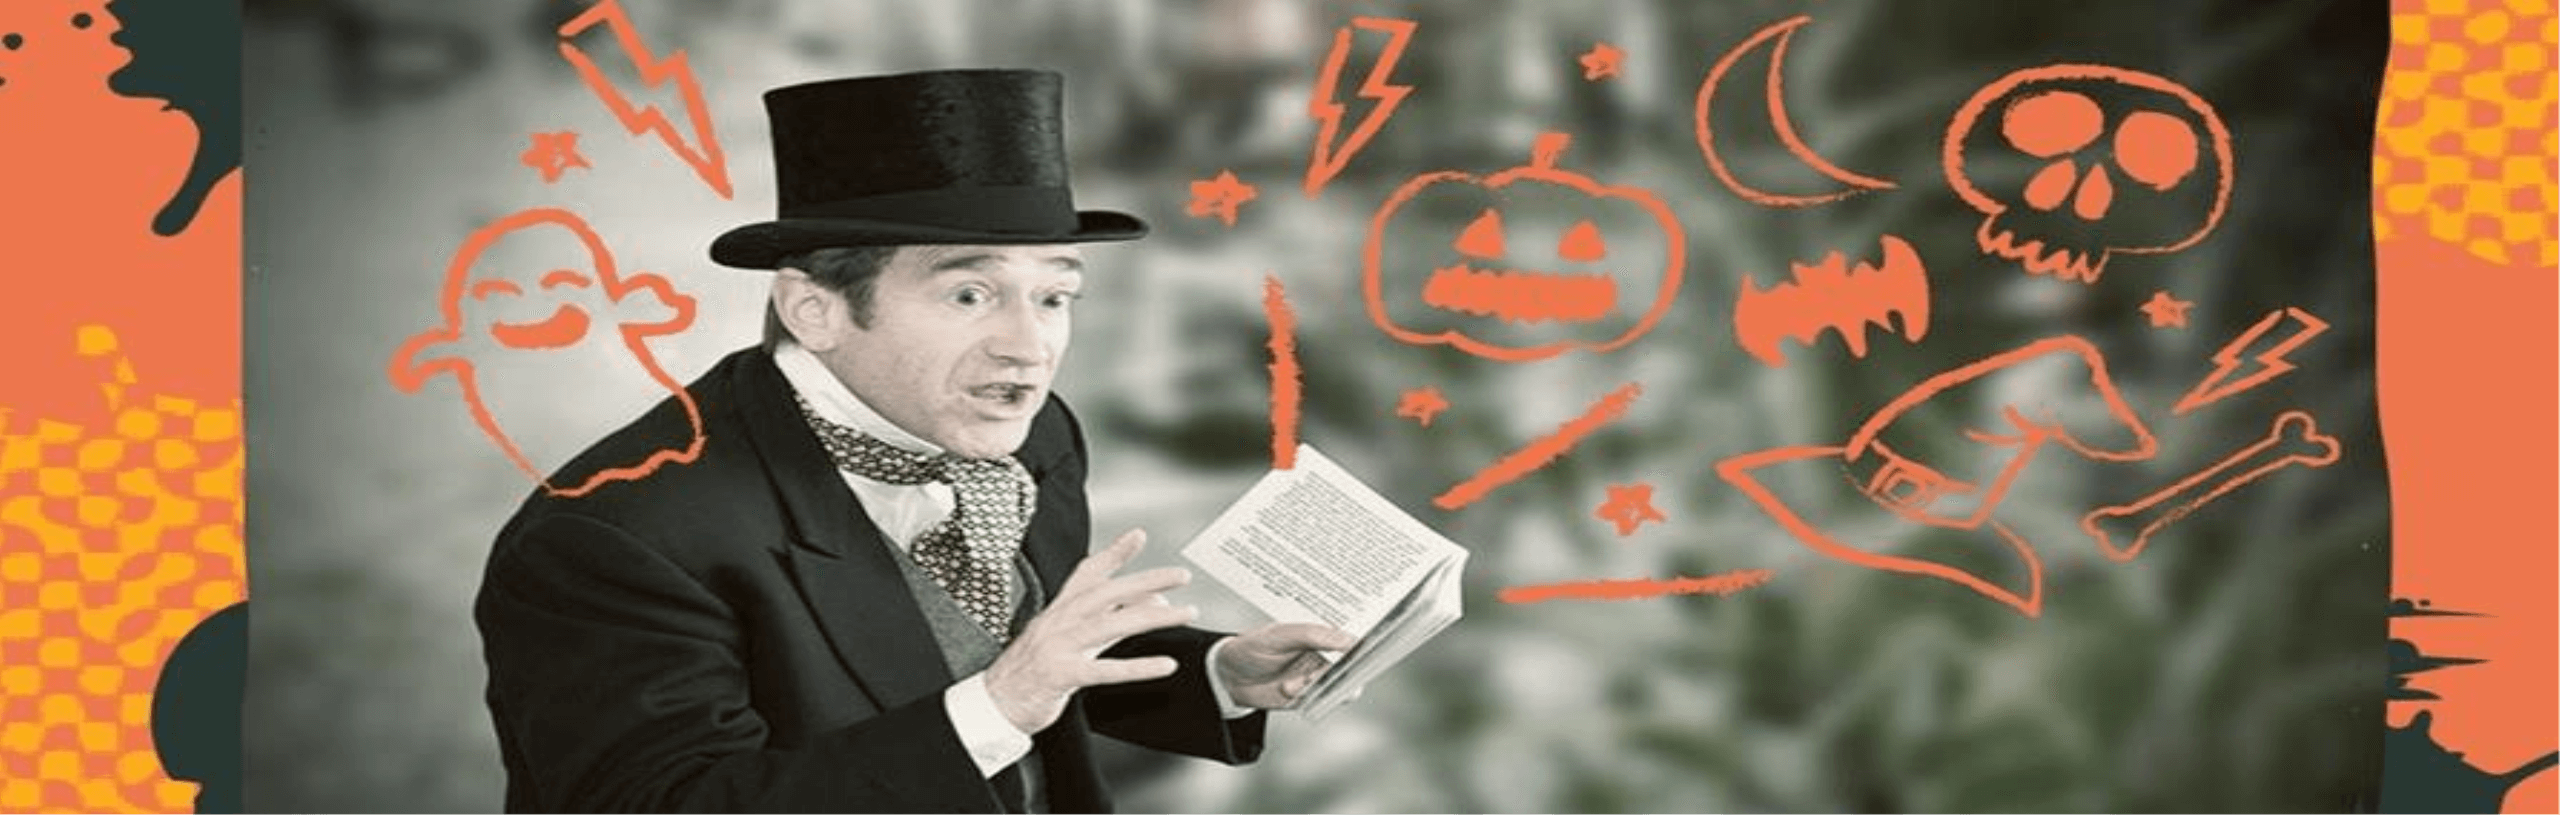 Spooktacular Saturday: Storytelling with Chris Connaughton 